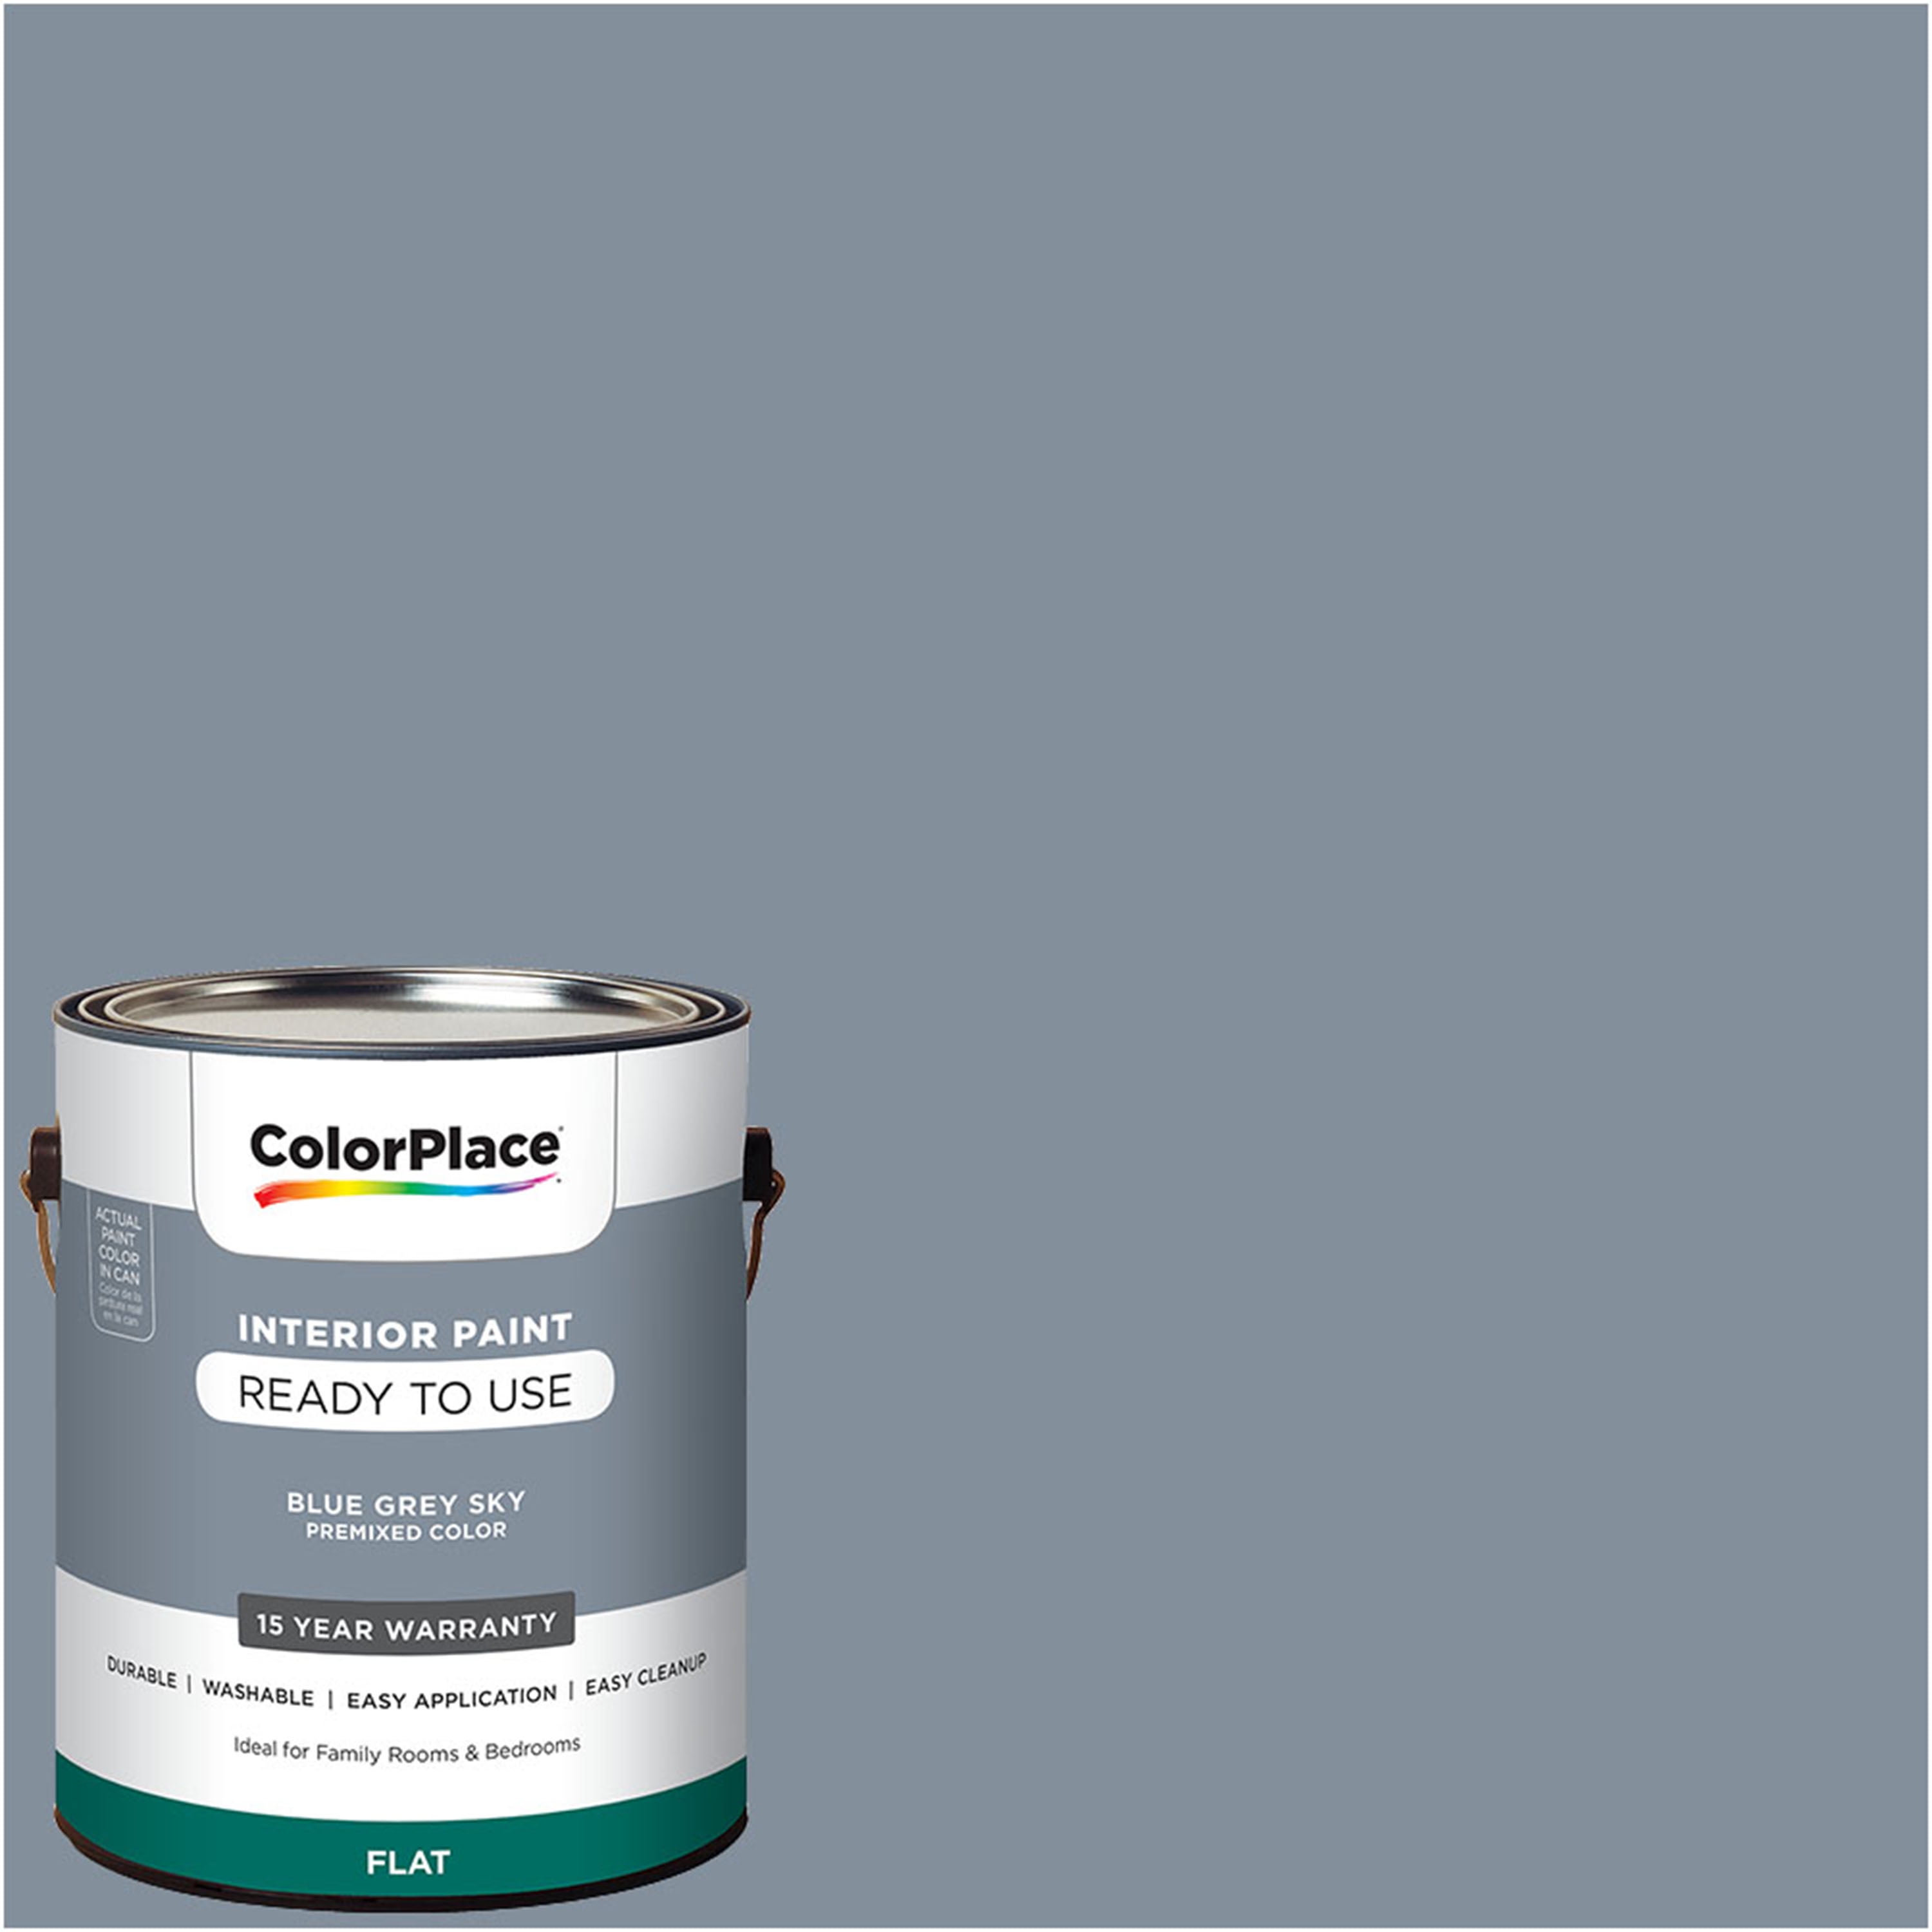 ColorPlace Ready to Use Interior Paint, Blue Grey Sky, 1 Gallon, Flat